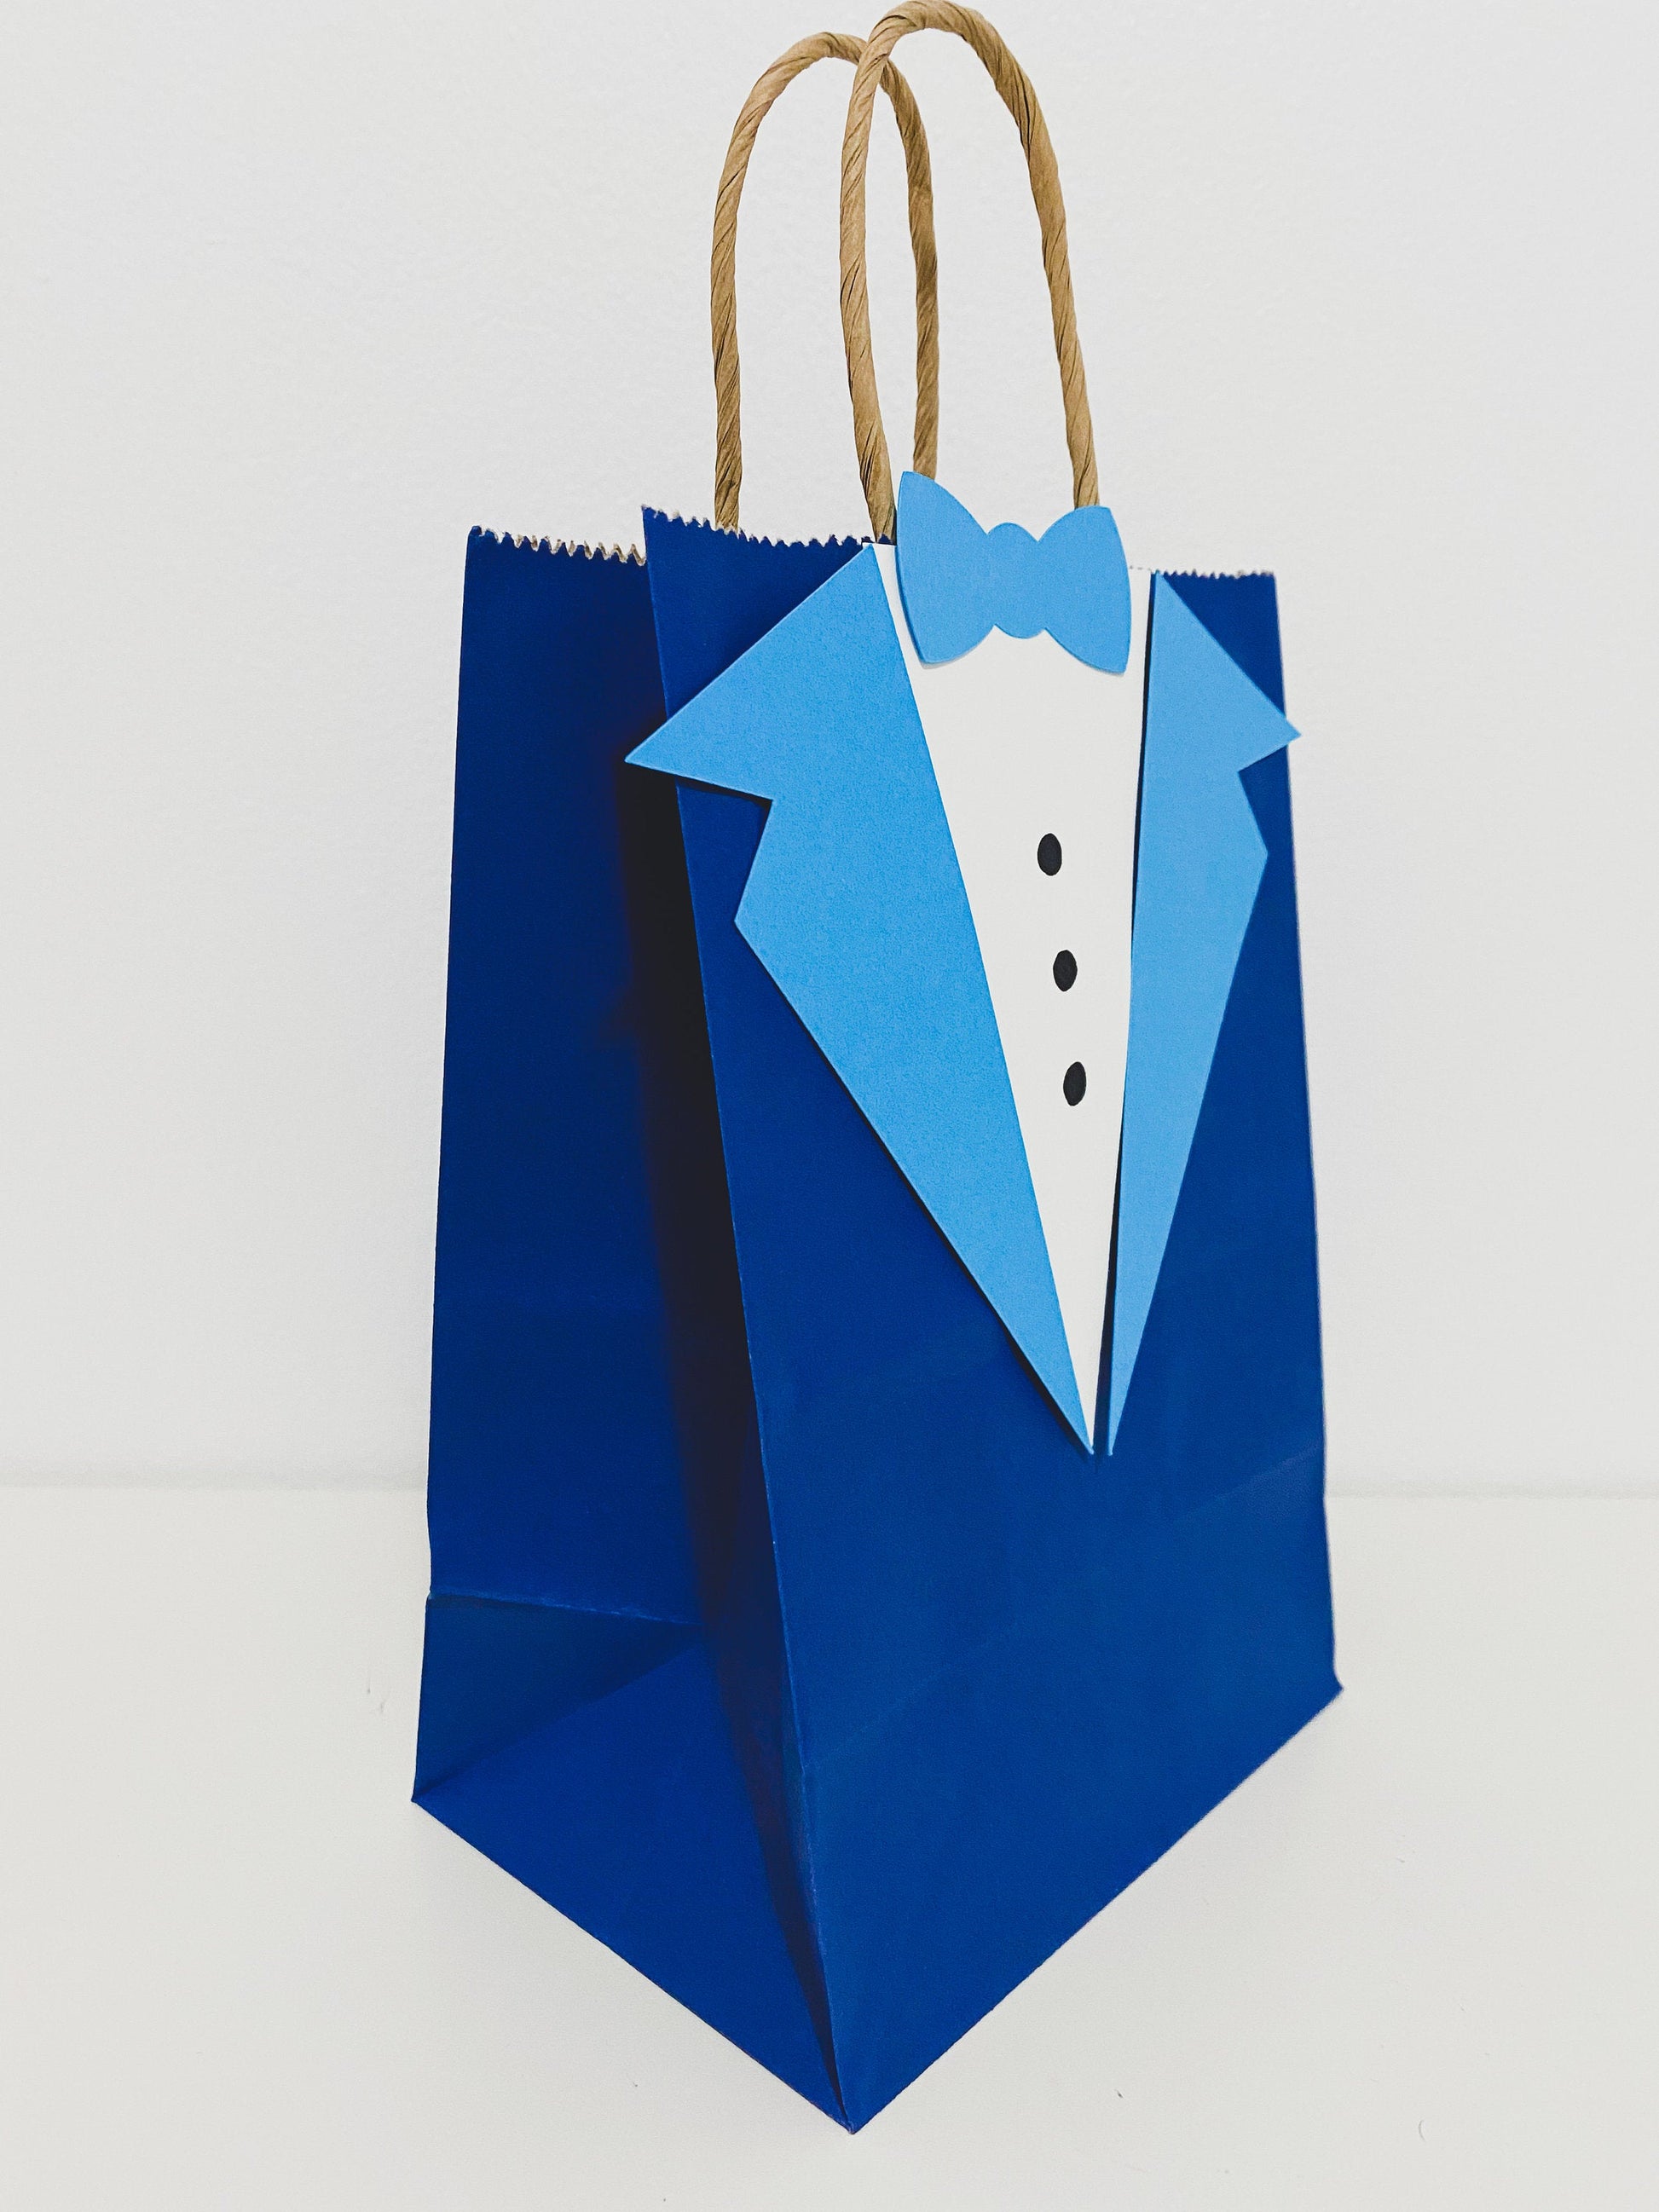 Mr Onederful Birthday Favor Bags